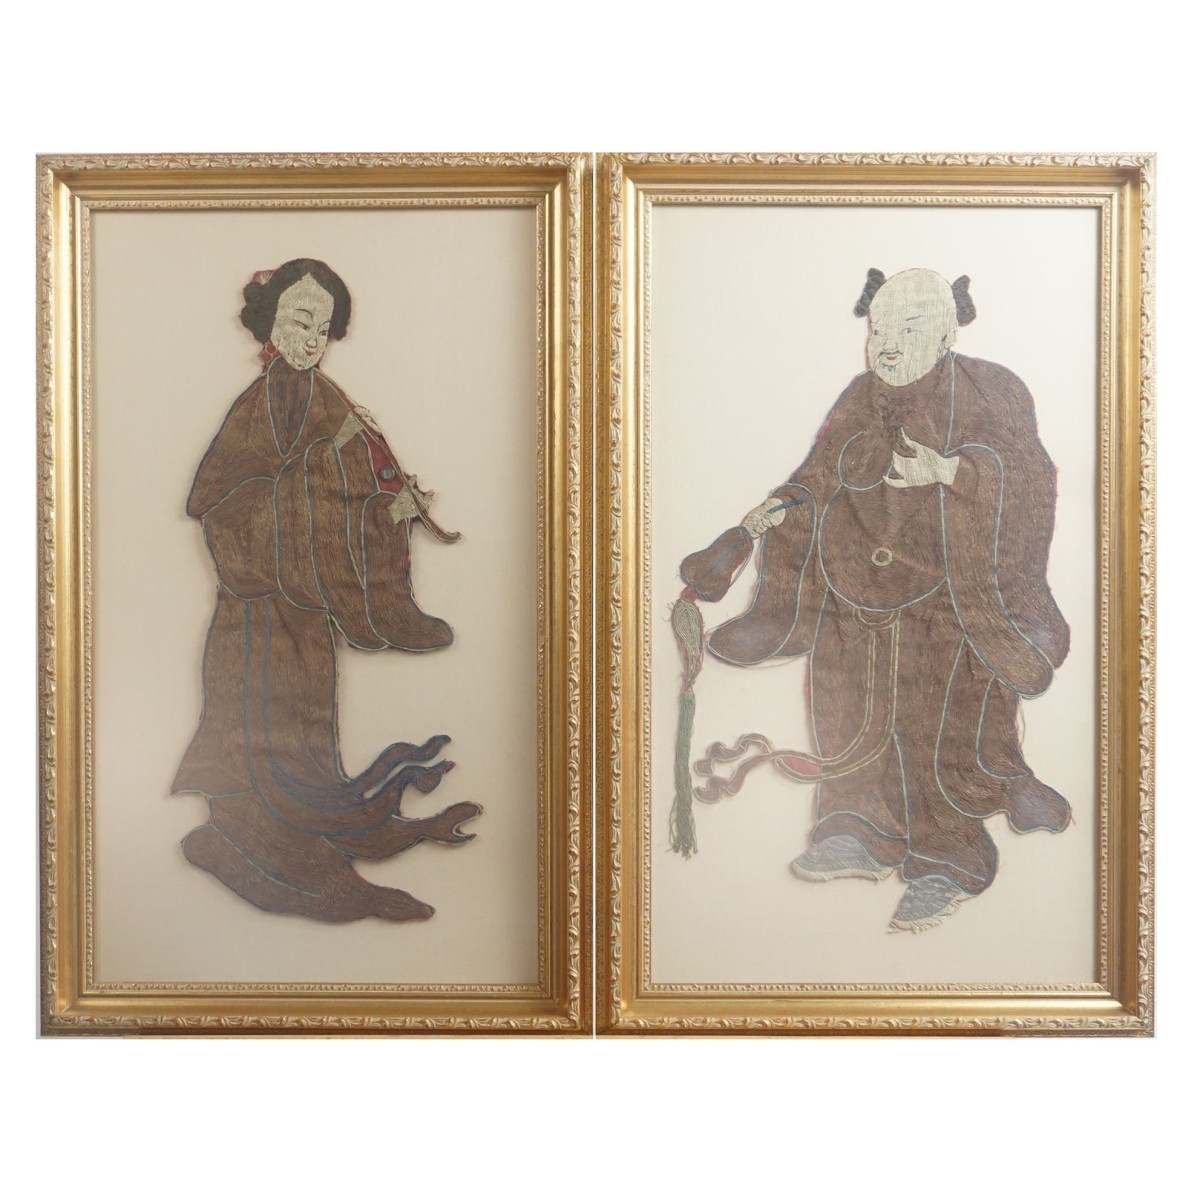 Pair of Chinese Embroidered Panels